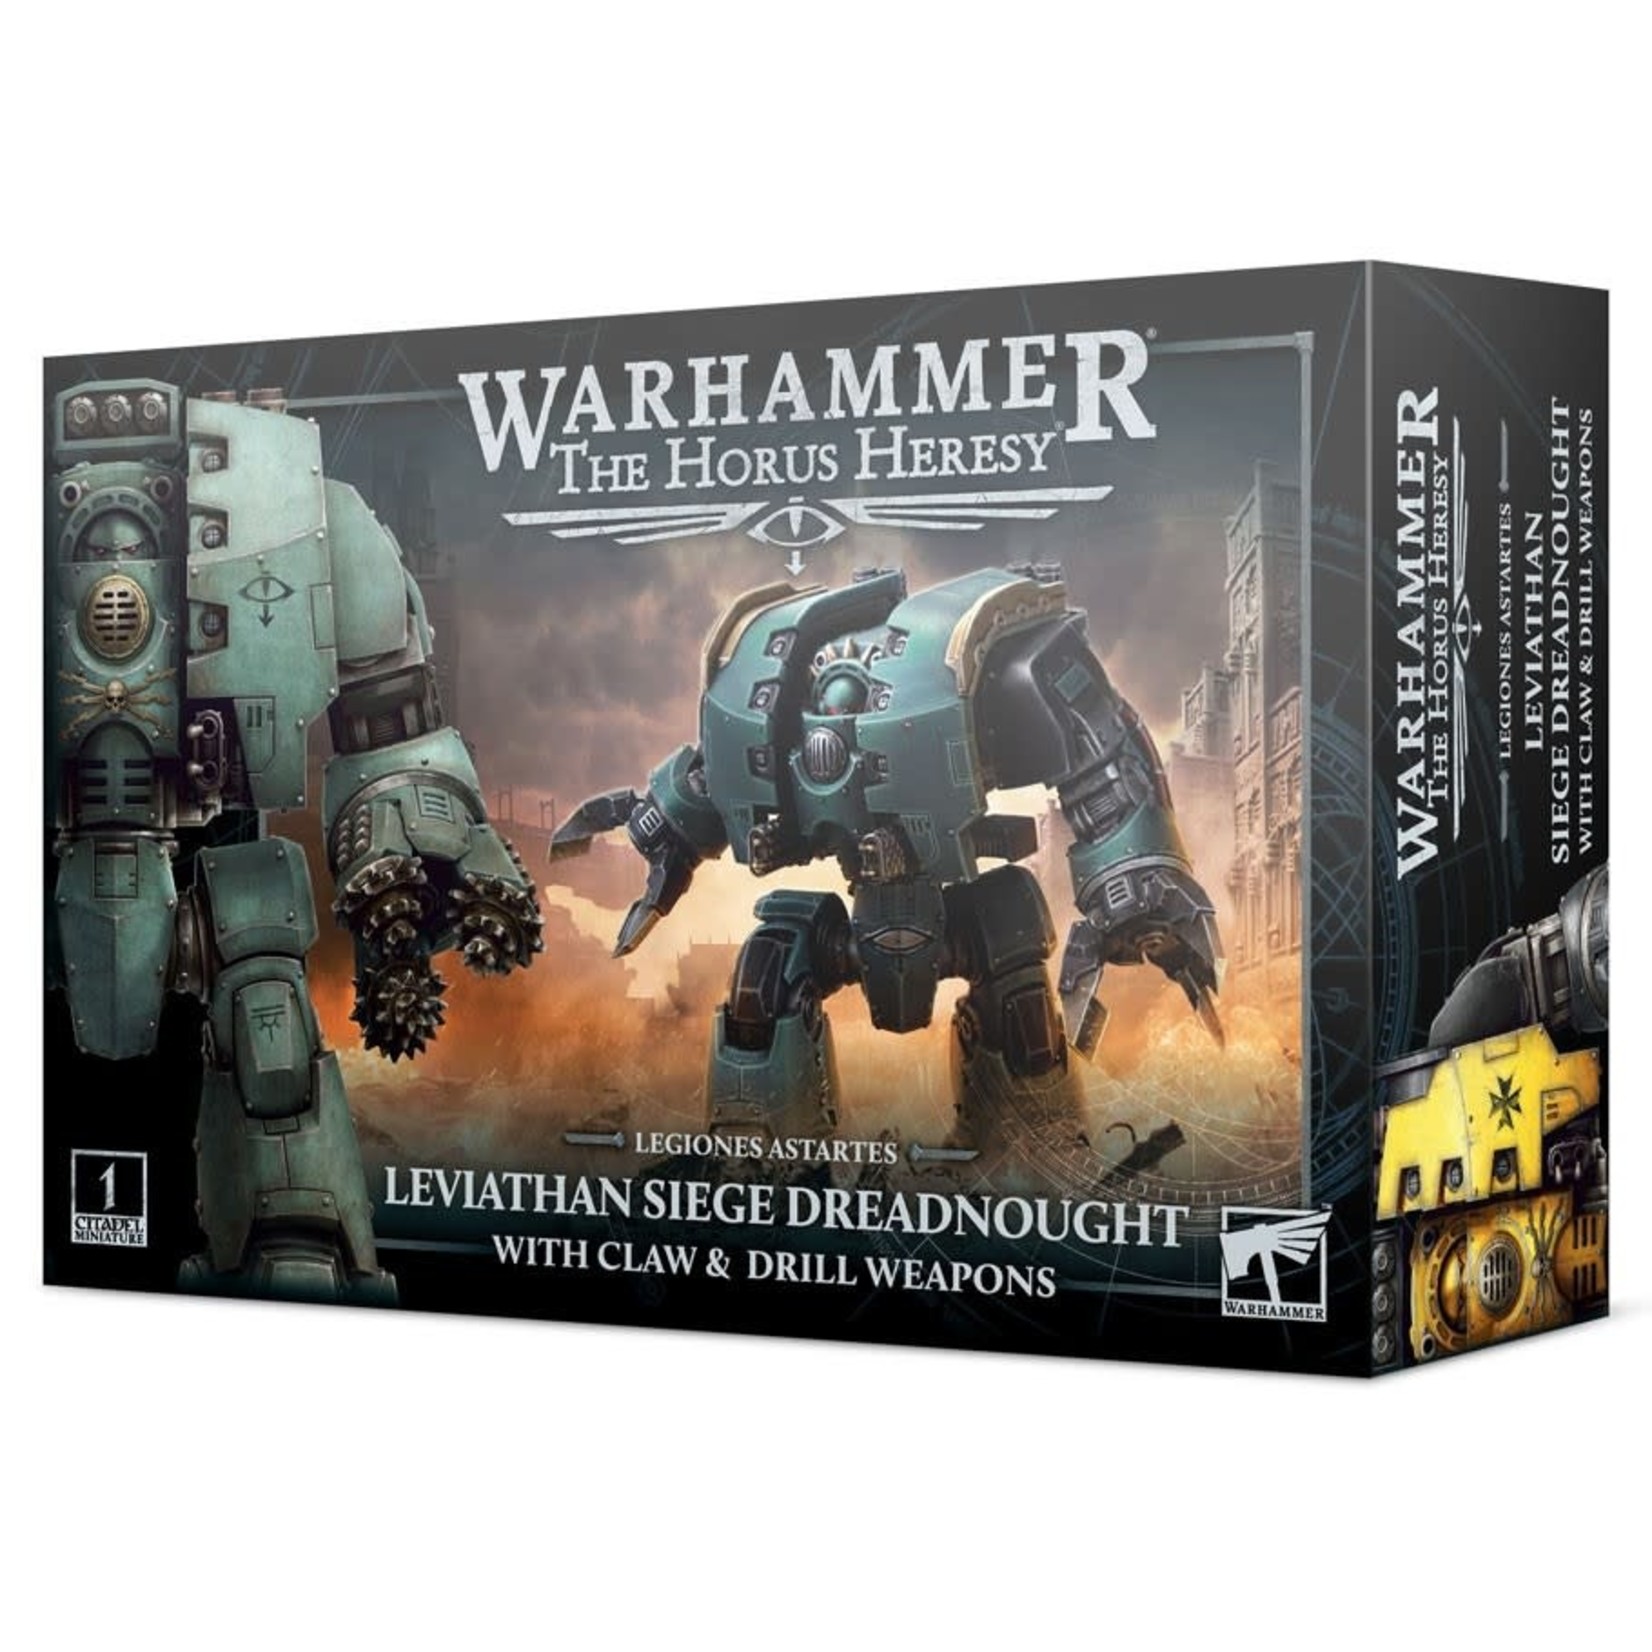 Warhammer: The Horus Heresy – Leviathan Siege Dreadnought with Claw & Drill Weapons